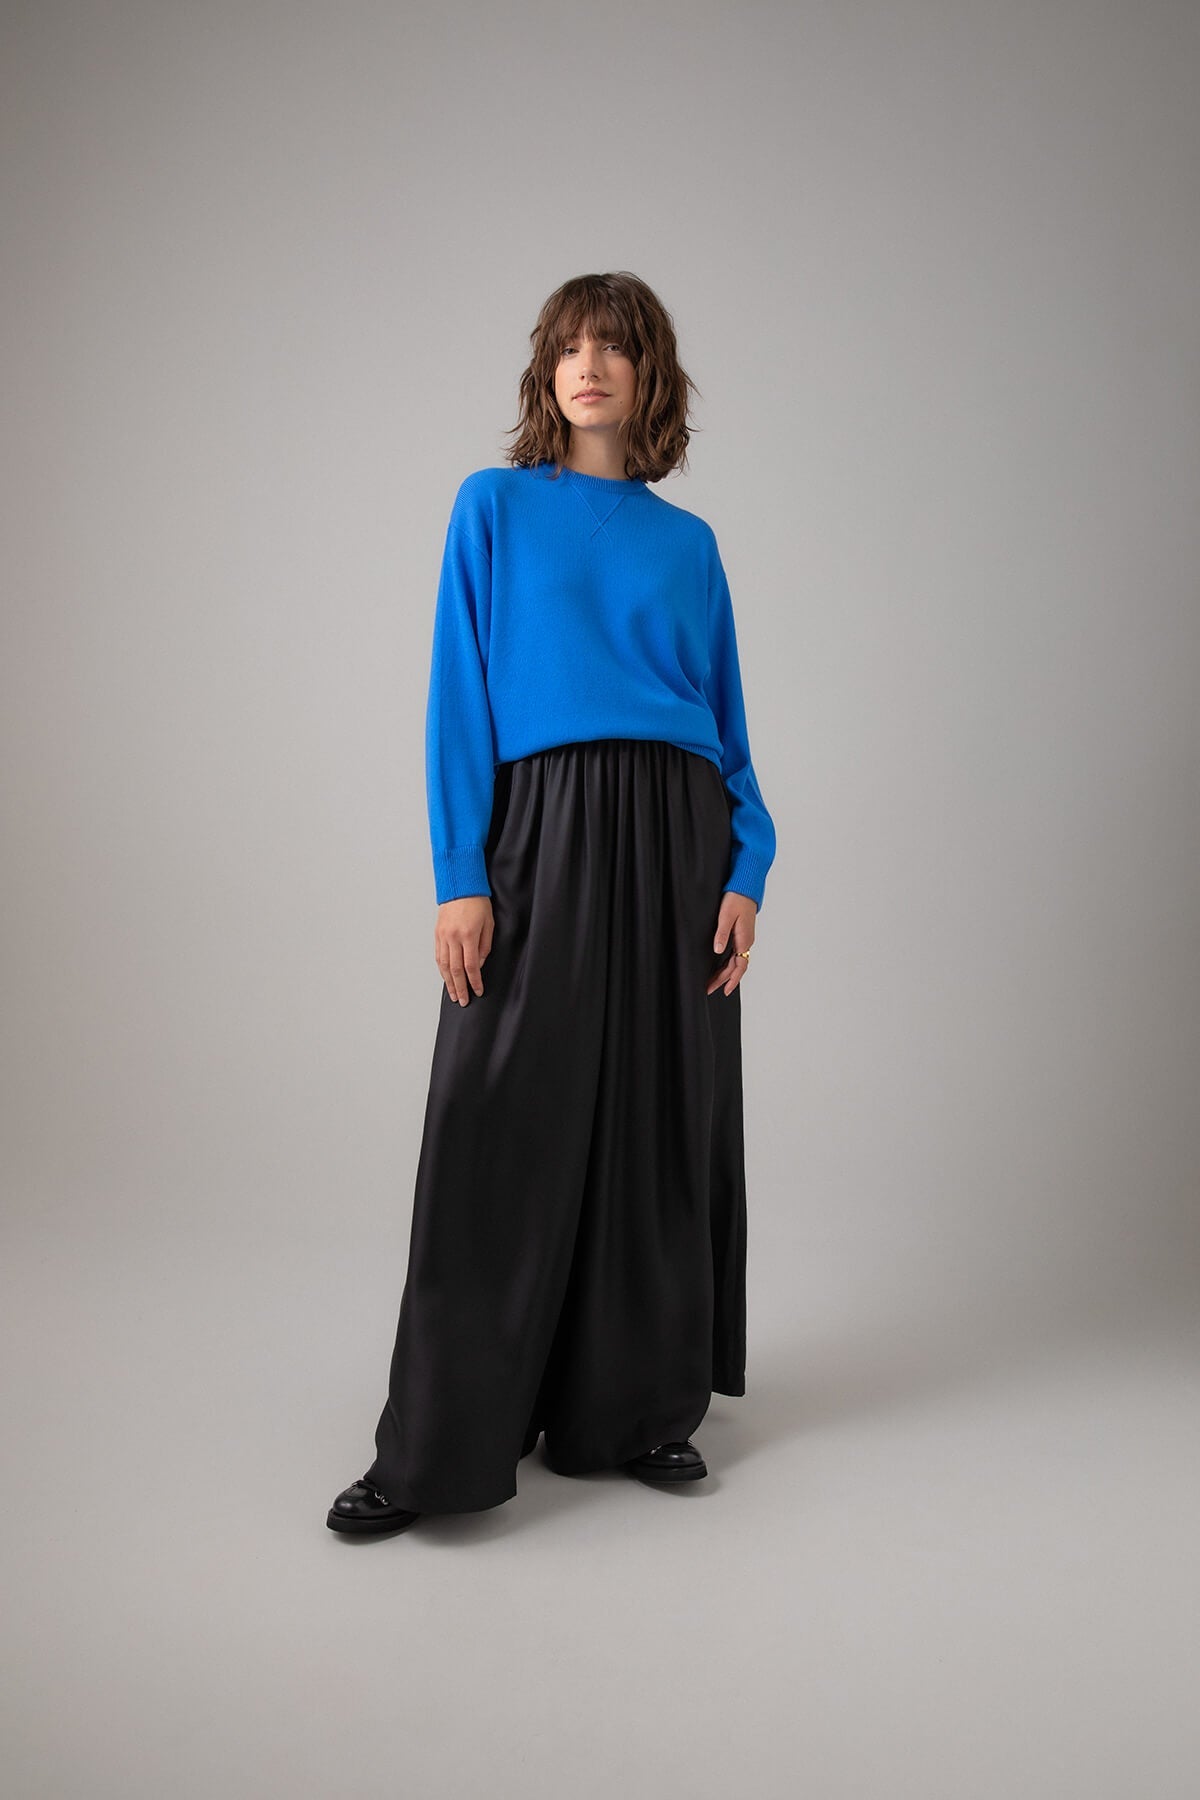 Johnstons of Elgin Women's Cashmere Girlfriend Style Sweatshirt in Orkney Blue worn with a Black Long Skirt on a grey background KAA05158SD4991